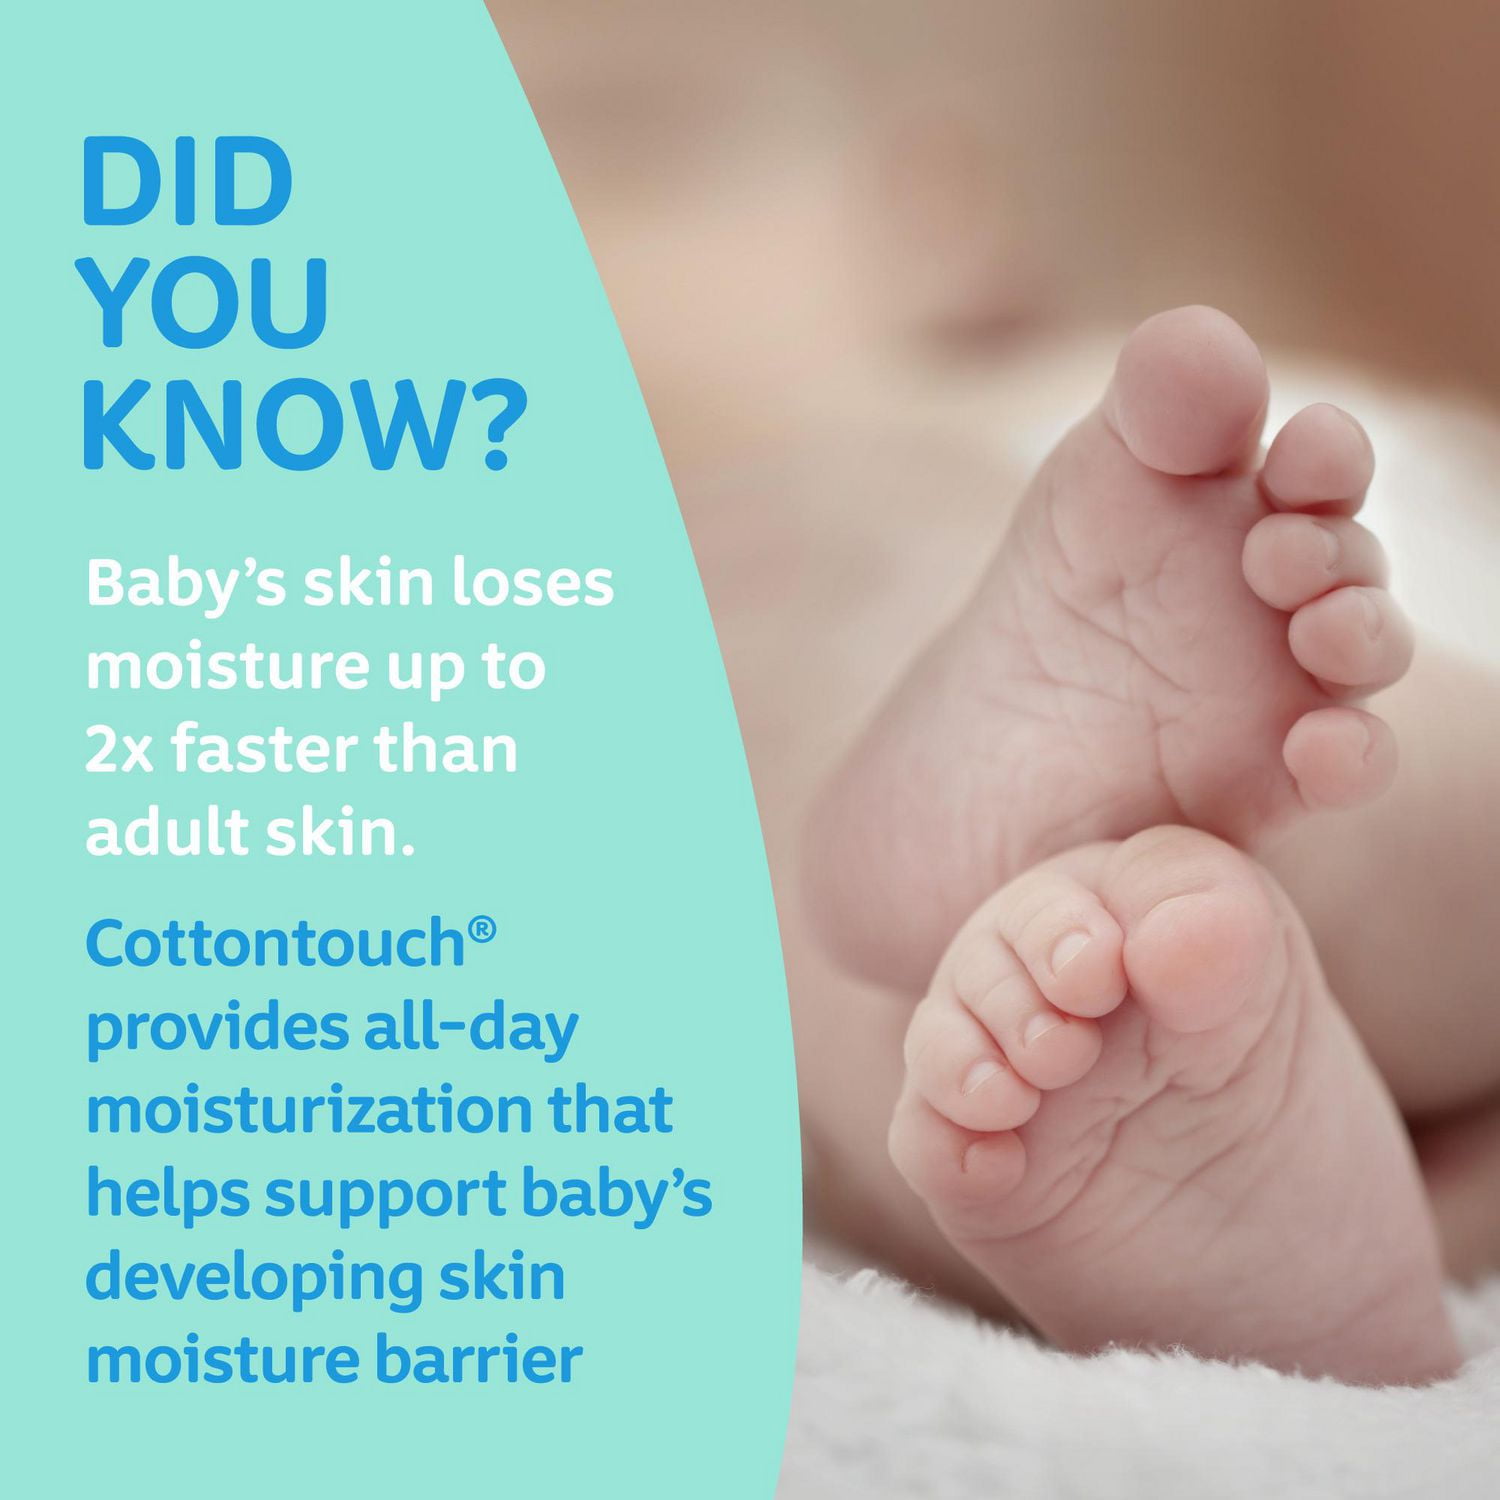 Buy Johnsons Cottontouch Baby Lotion Face & Body online at